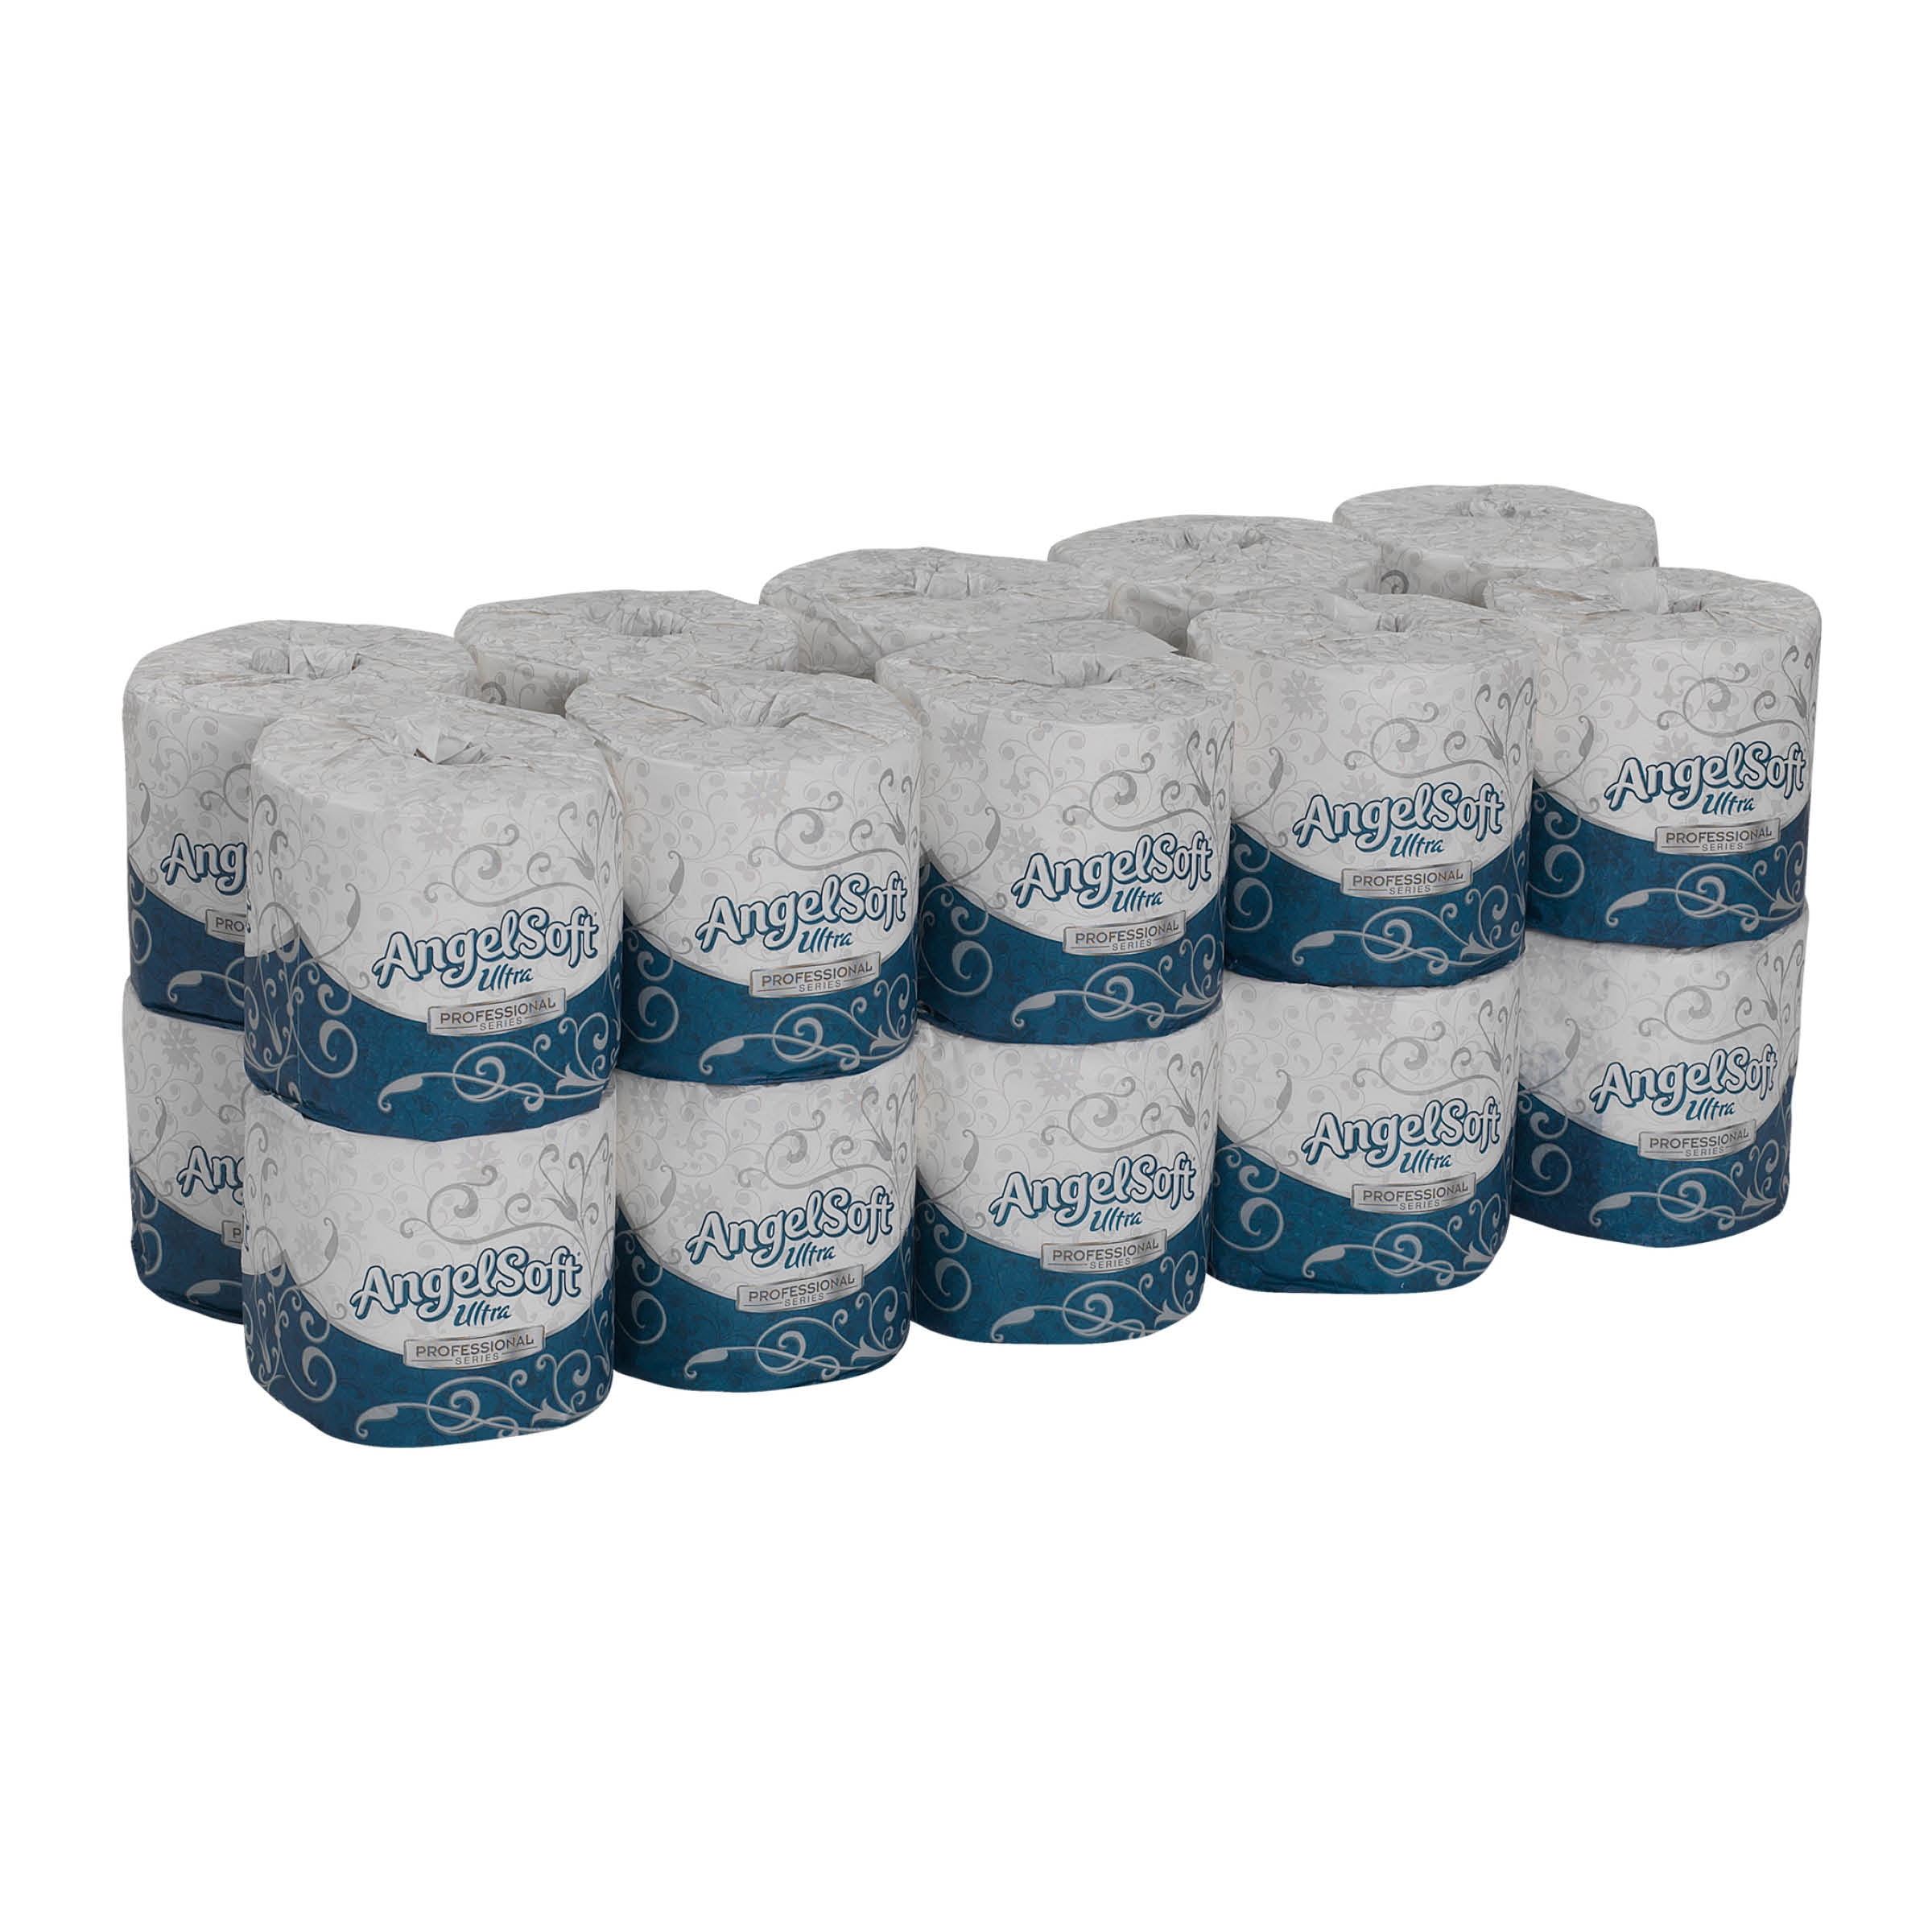 96 Sheets Per Box Angel Soft Ultra Professional Series Premium 2-Ply Facial Tissue by GP PRO Cube Box 46560 Georgia-Pacific 36 Boxes Per Case Georgia Pacific/Ft James GPC46560 GEP46560